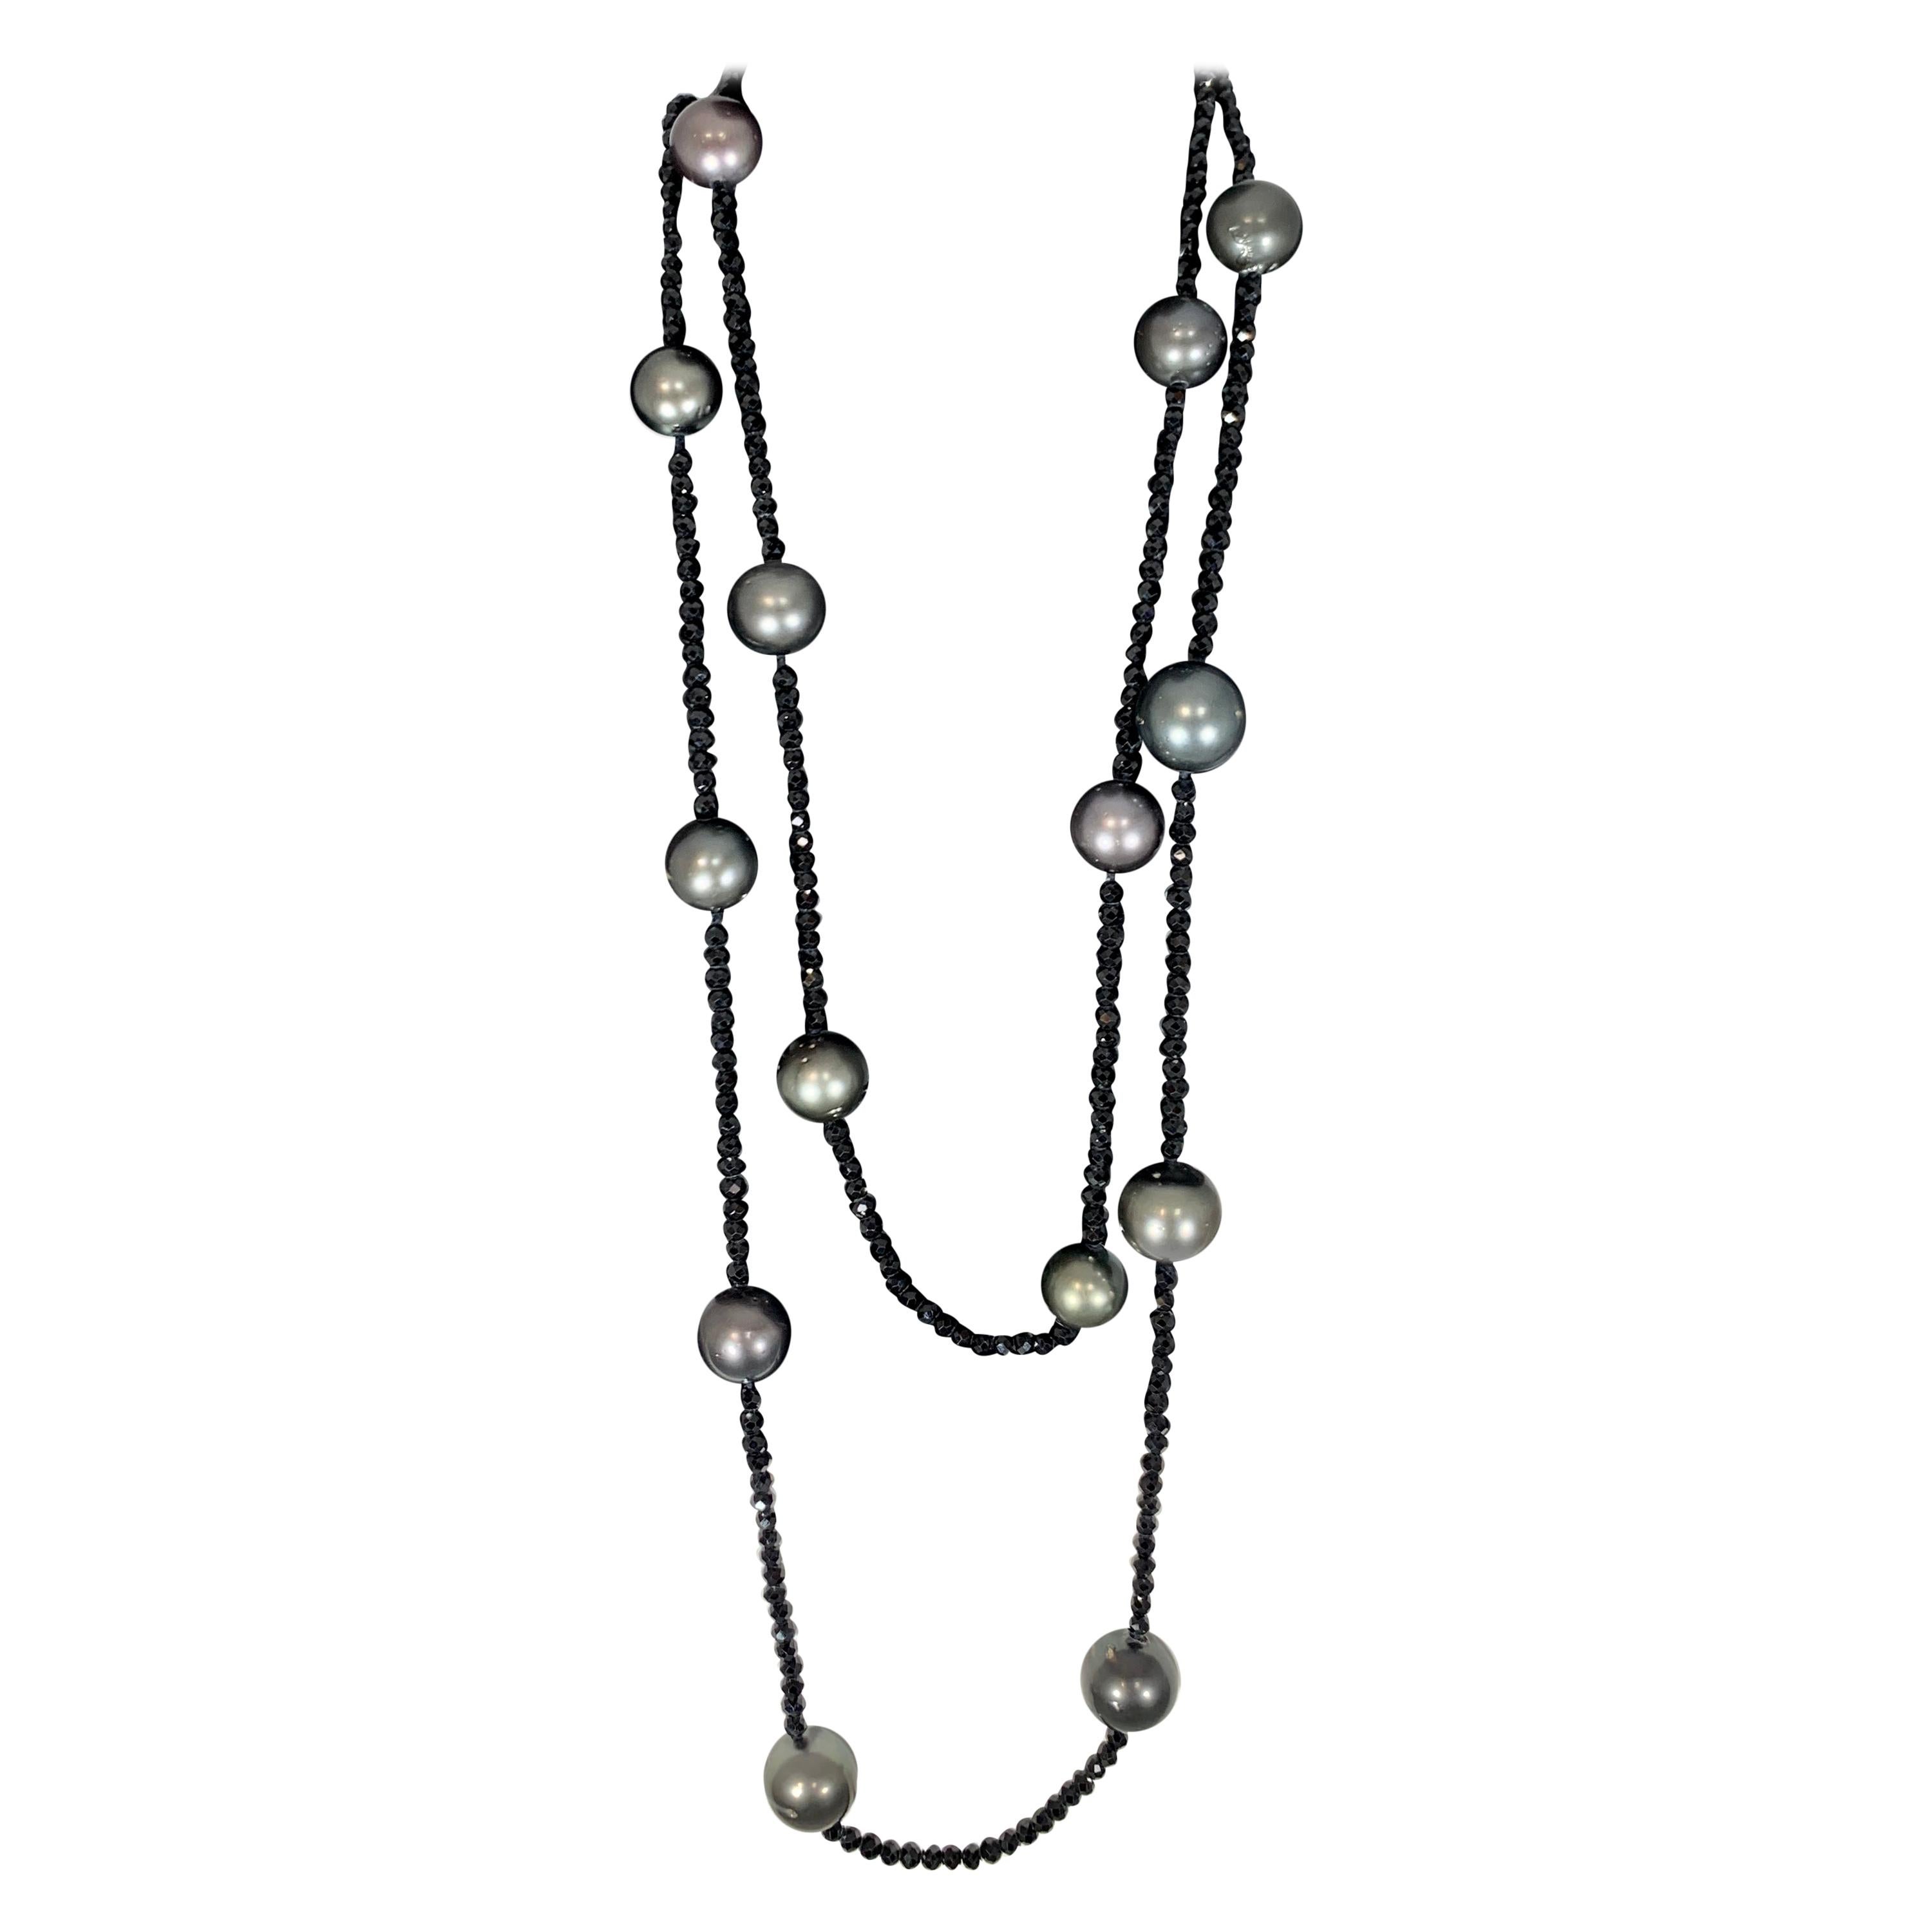 Black Tahitian Pearl Single Strand Necklace with Black Spinel, Opera Length 46" For Sale